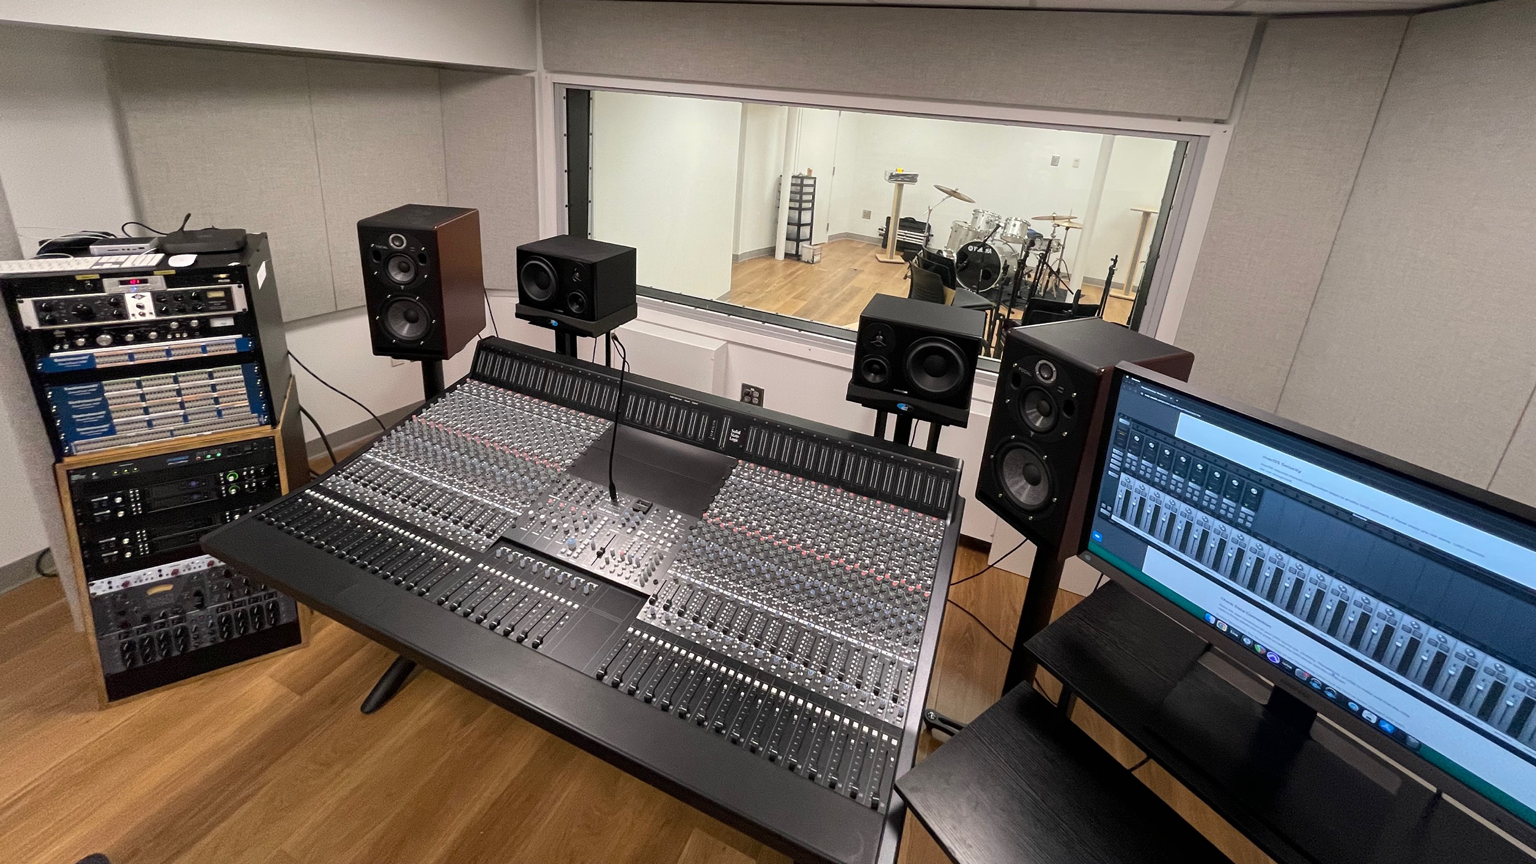 Control room in the recording studio showing equipment racks, monitors, mixing board, and display